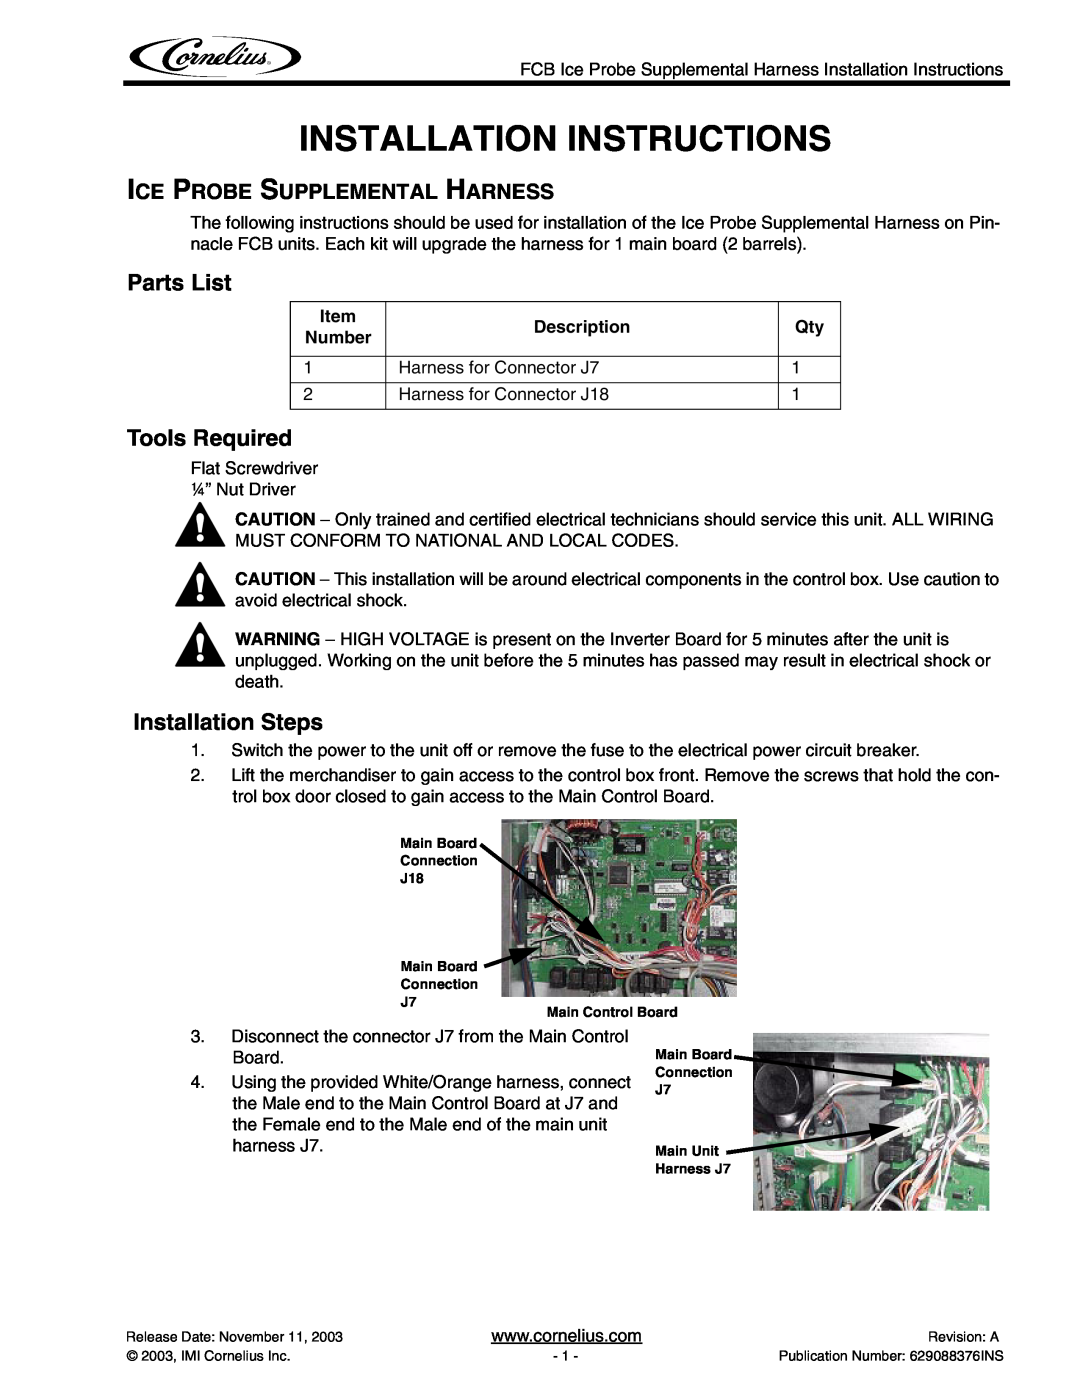 Cornelius J7 installation instructions Installation Instructions, Parts List, Tools Required, Installation Steps, Number 